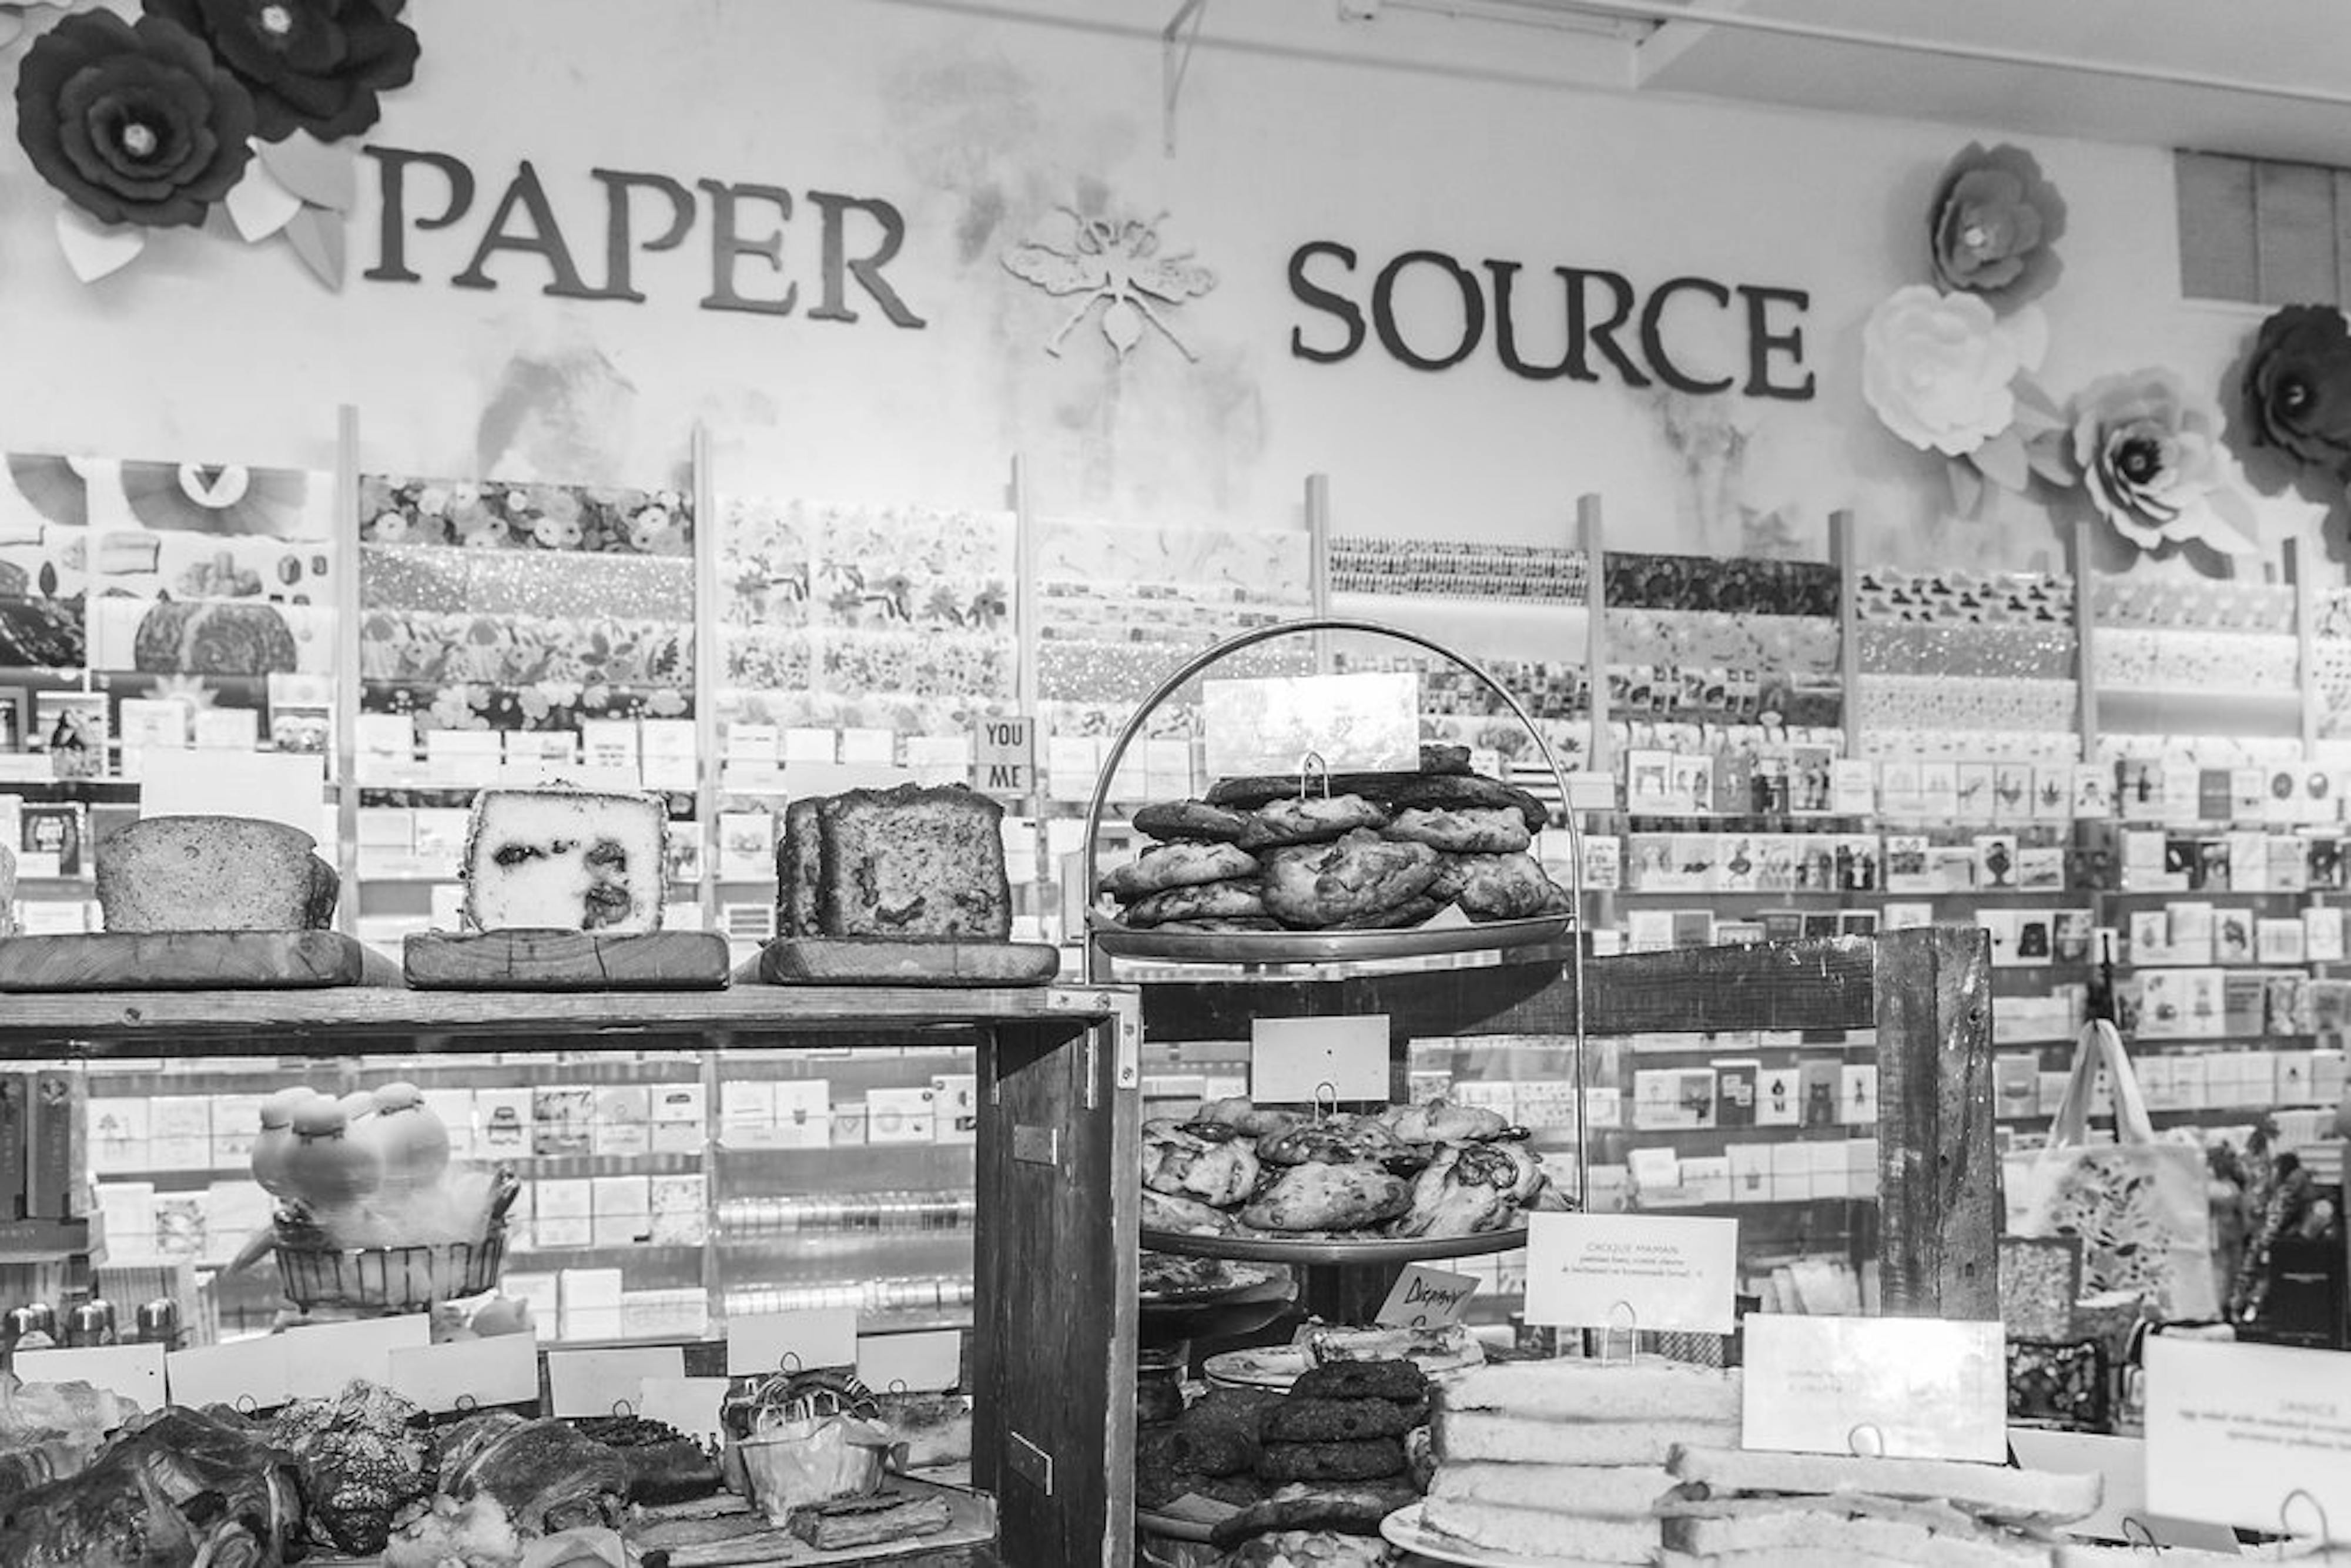 maman pastries with paper source products